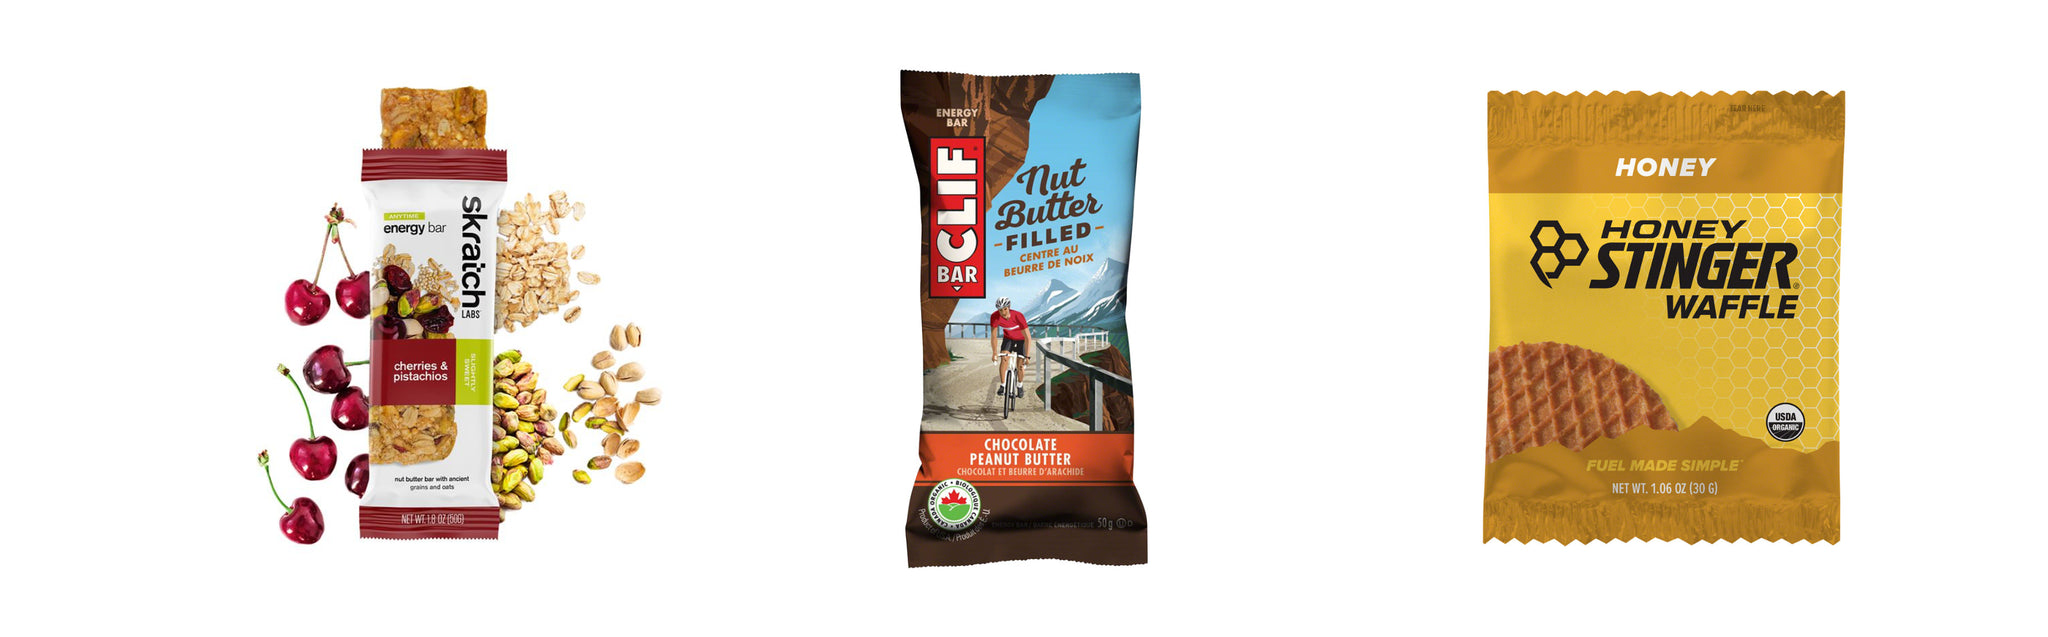 Best cycling energy bars and waffles